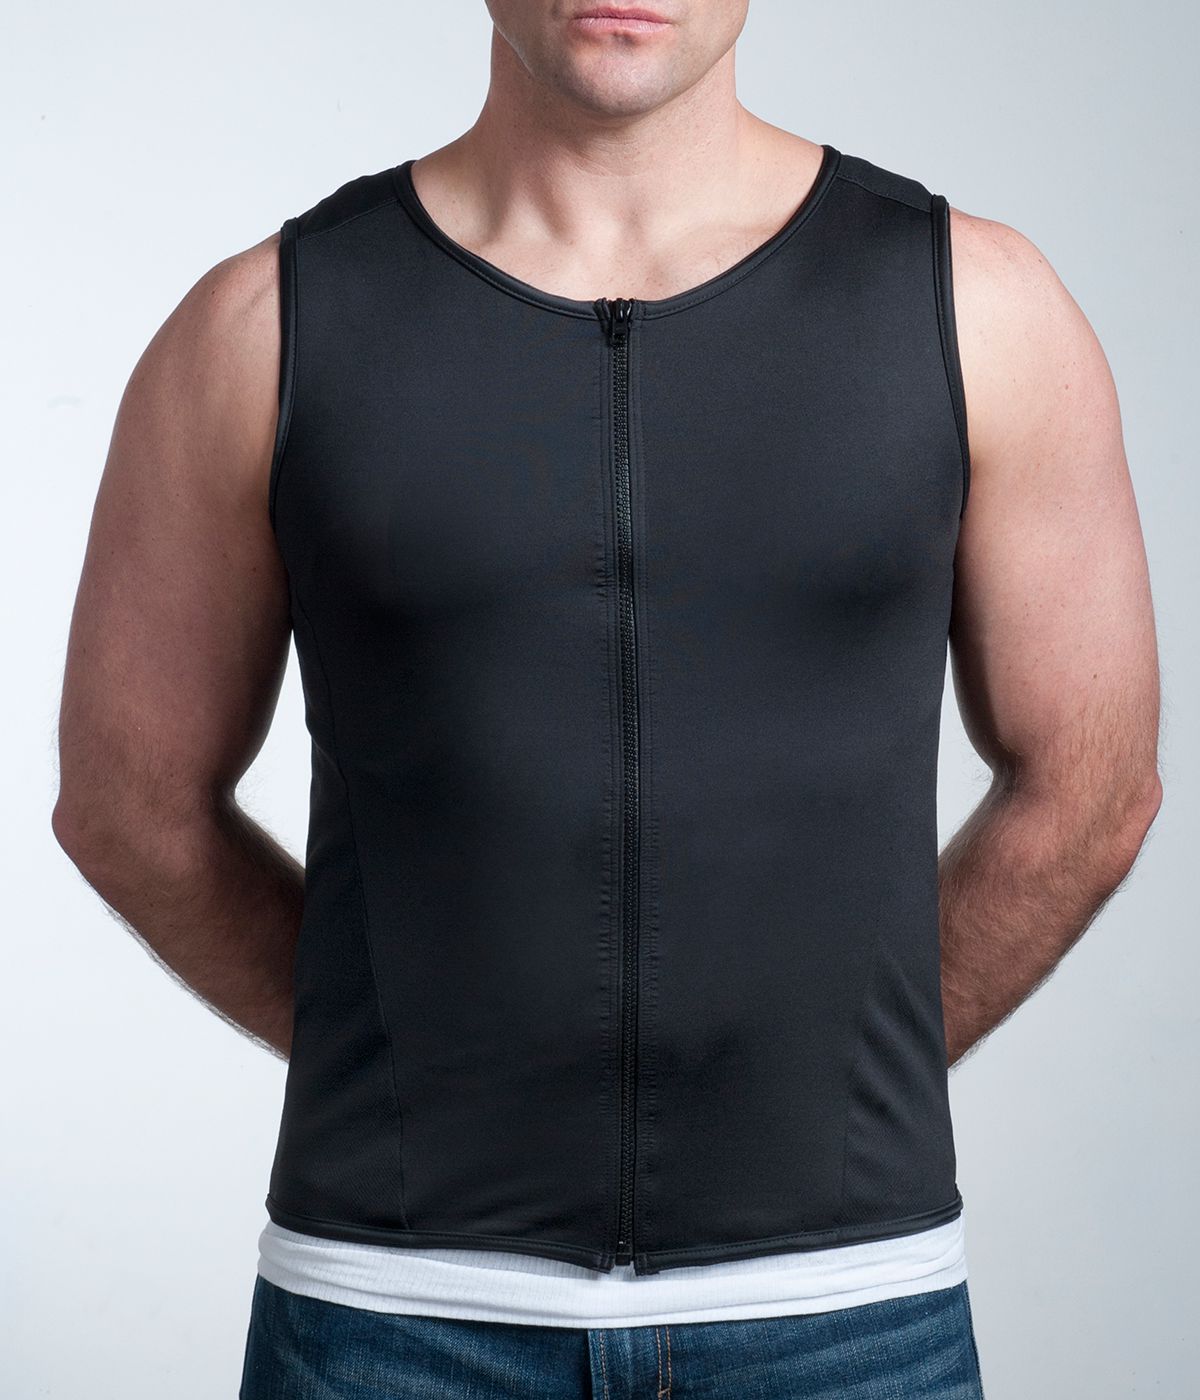 Revive Tank: Hot/Cold Back Pain Relief + Compression | Spand-Ice